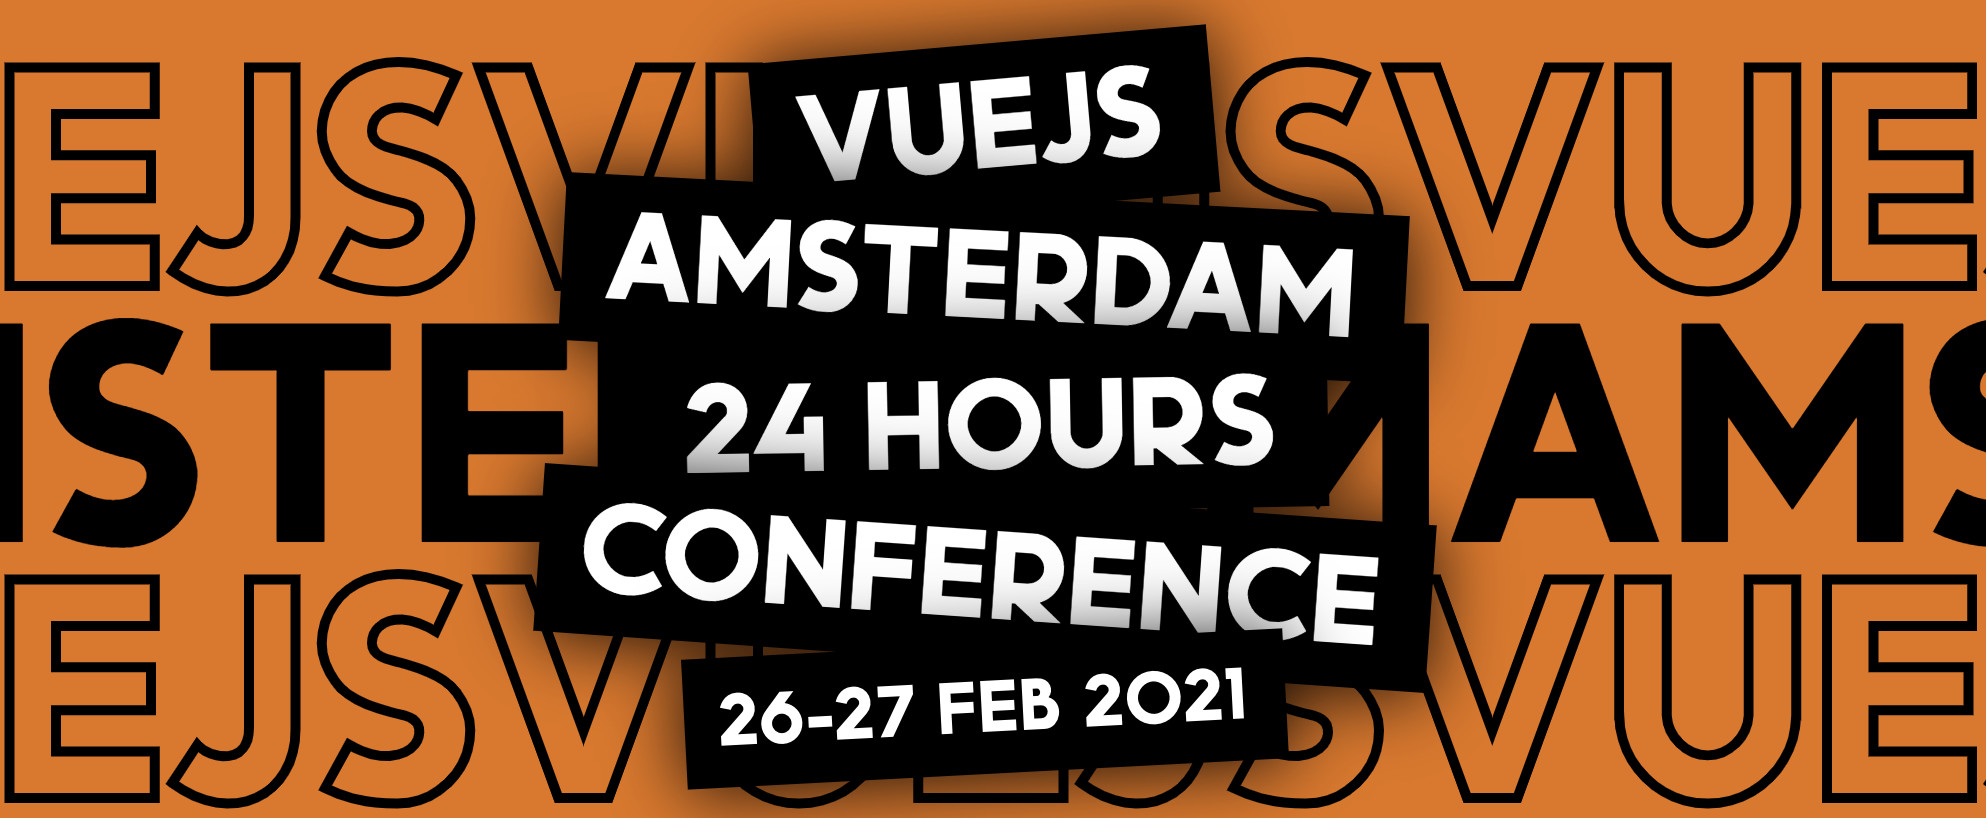 Free Vuejs Amsterdam 24 hour Online Conference